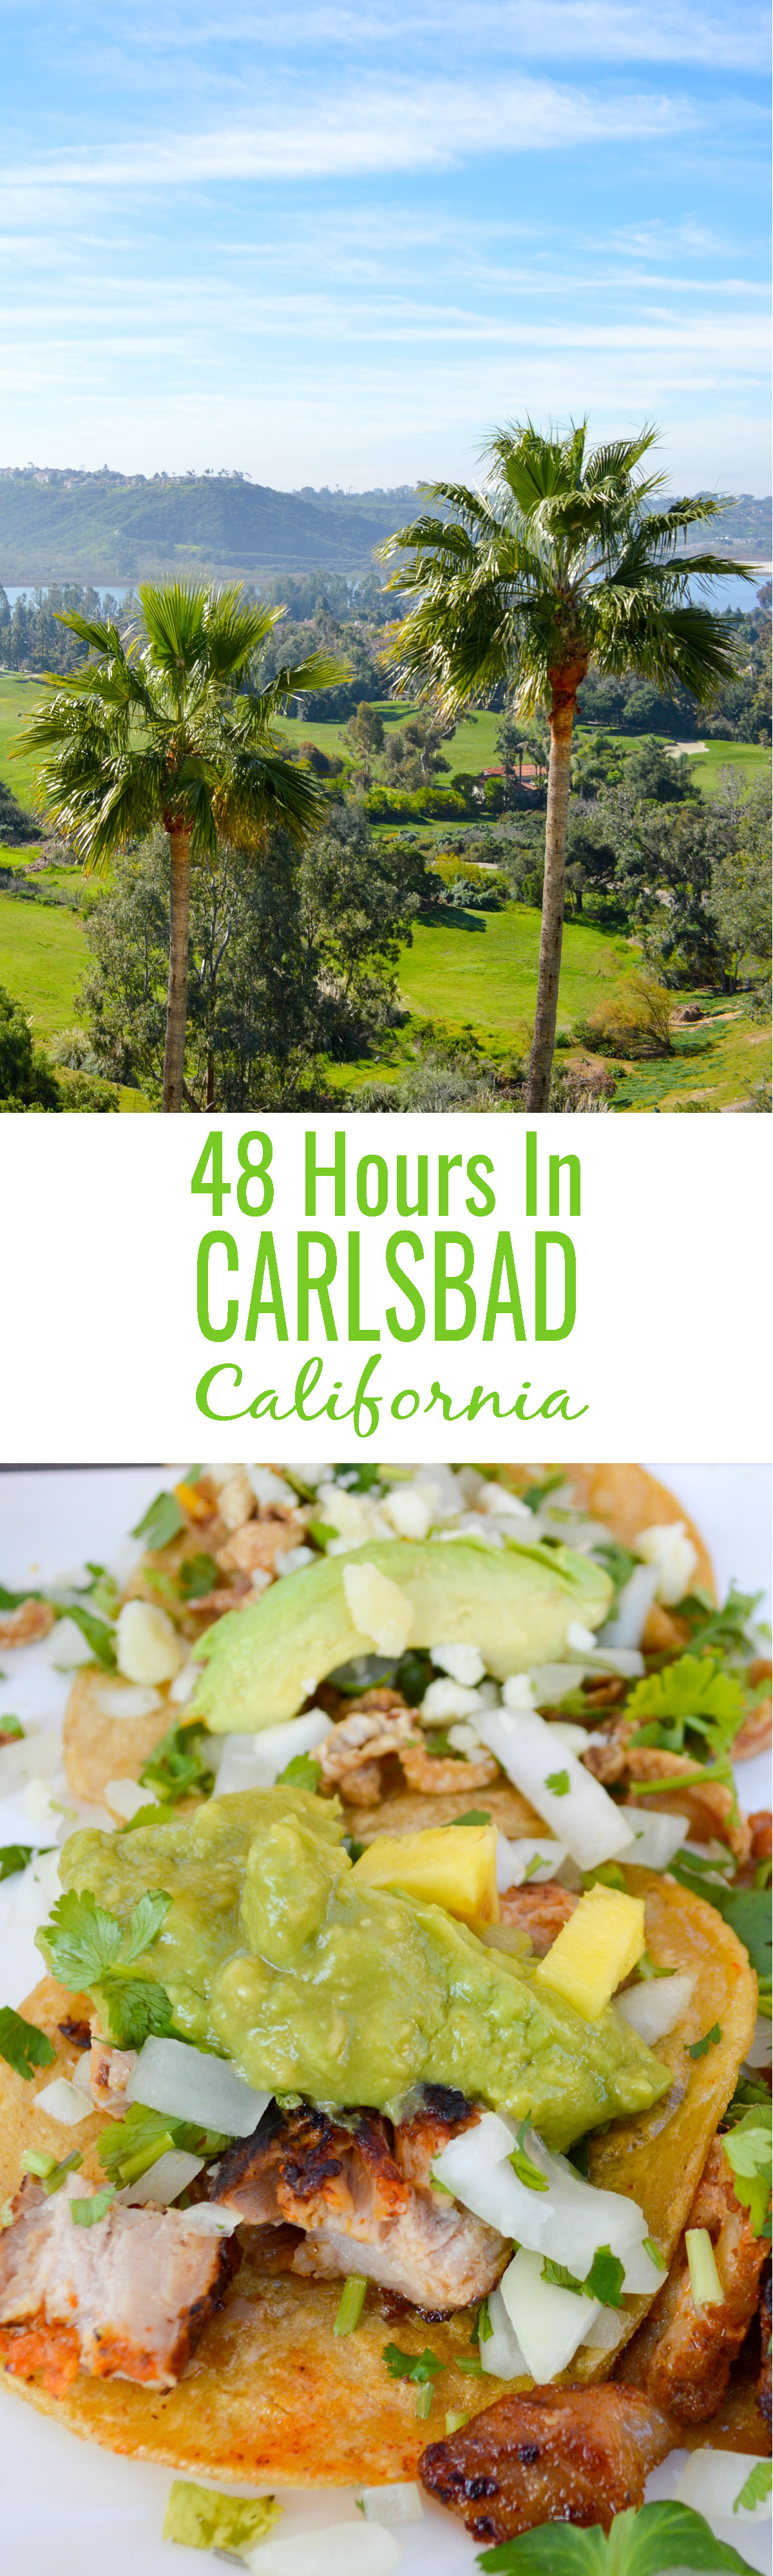 48 Hours in Carlsbad: A list of the best things to see, do, and taste. Carlsbad is a great place to take a beercation!